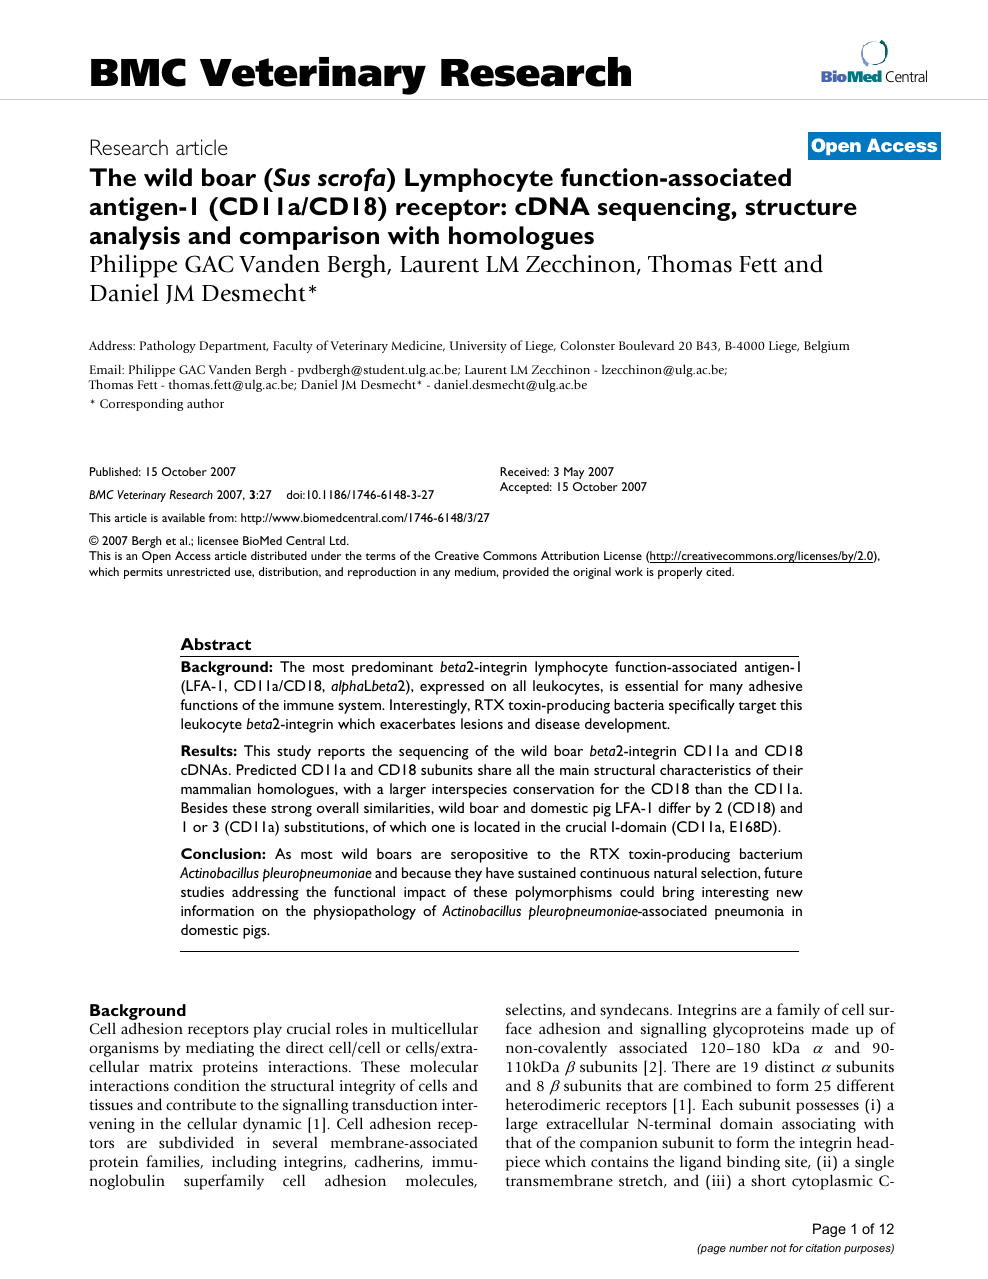 The Wild Boar Sus Scrofa Lymphocyte Function Associated Antigen 1 Cd11a Cd18 Receptor Cdna Sequencing Structure Analysis And Comparison With Homologues Topic Of Research Paper In Veterinary Science Download Scholarly Article Pdf And Read